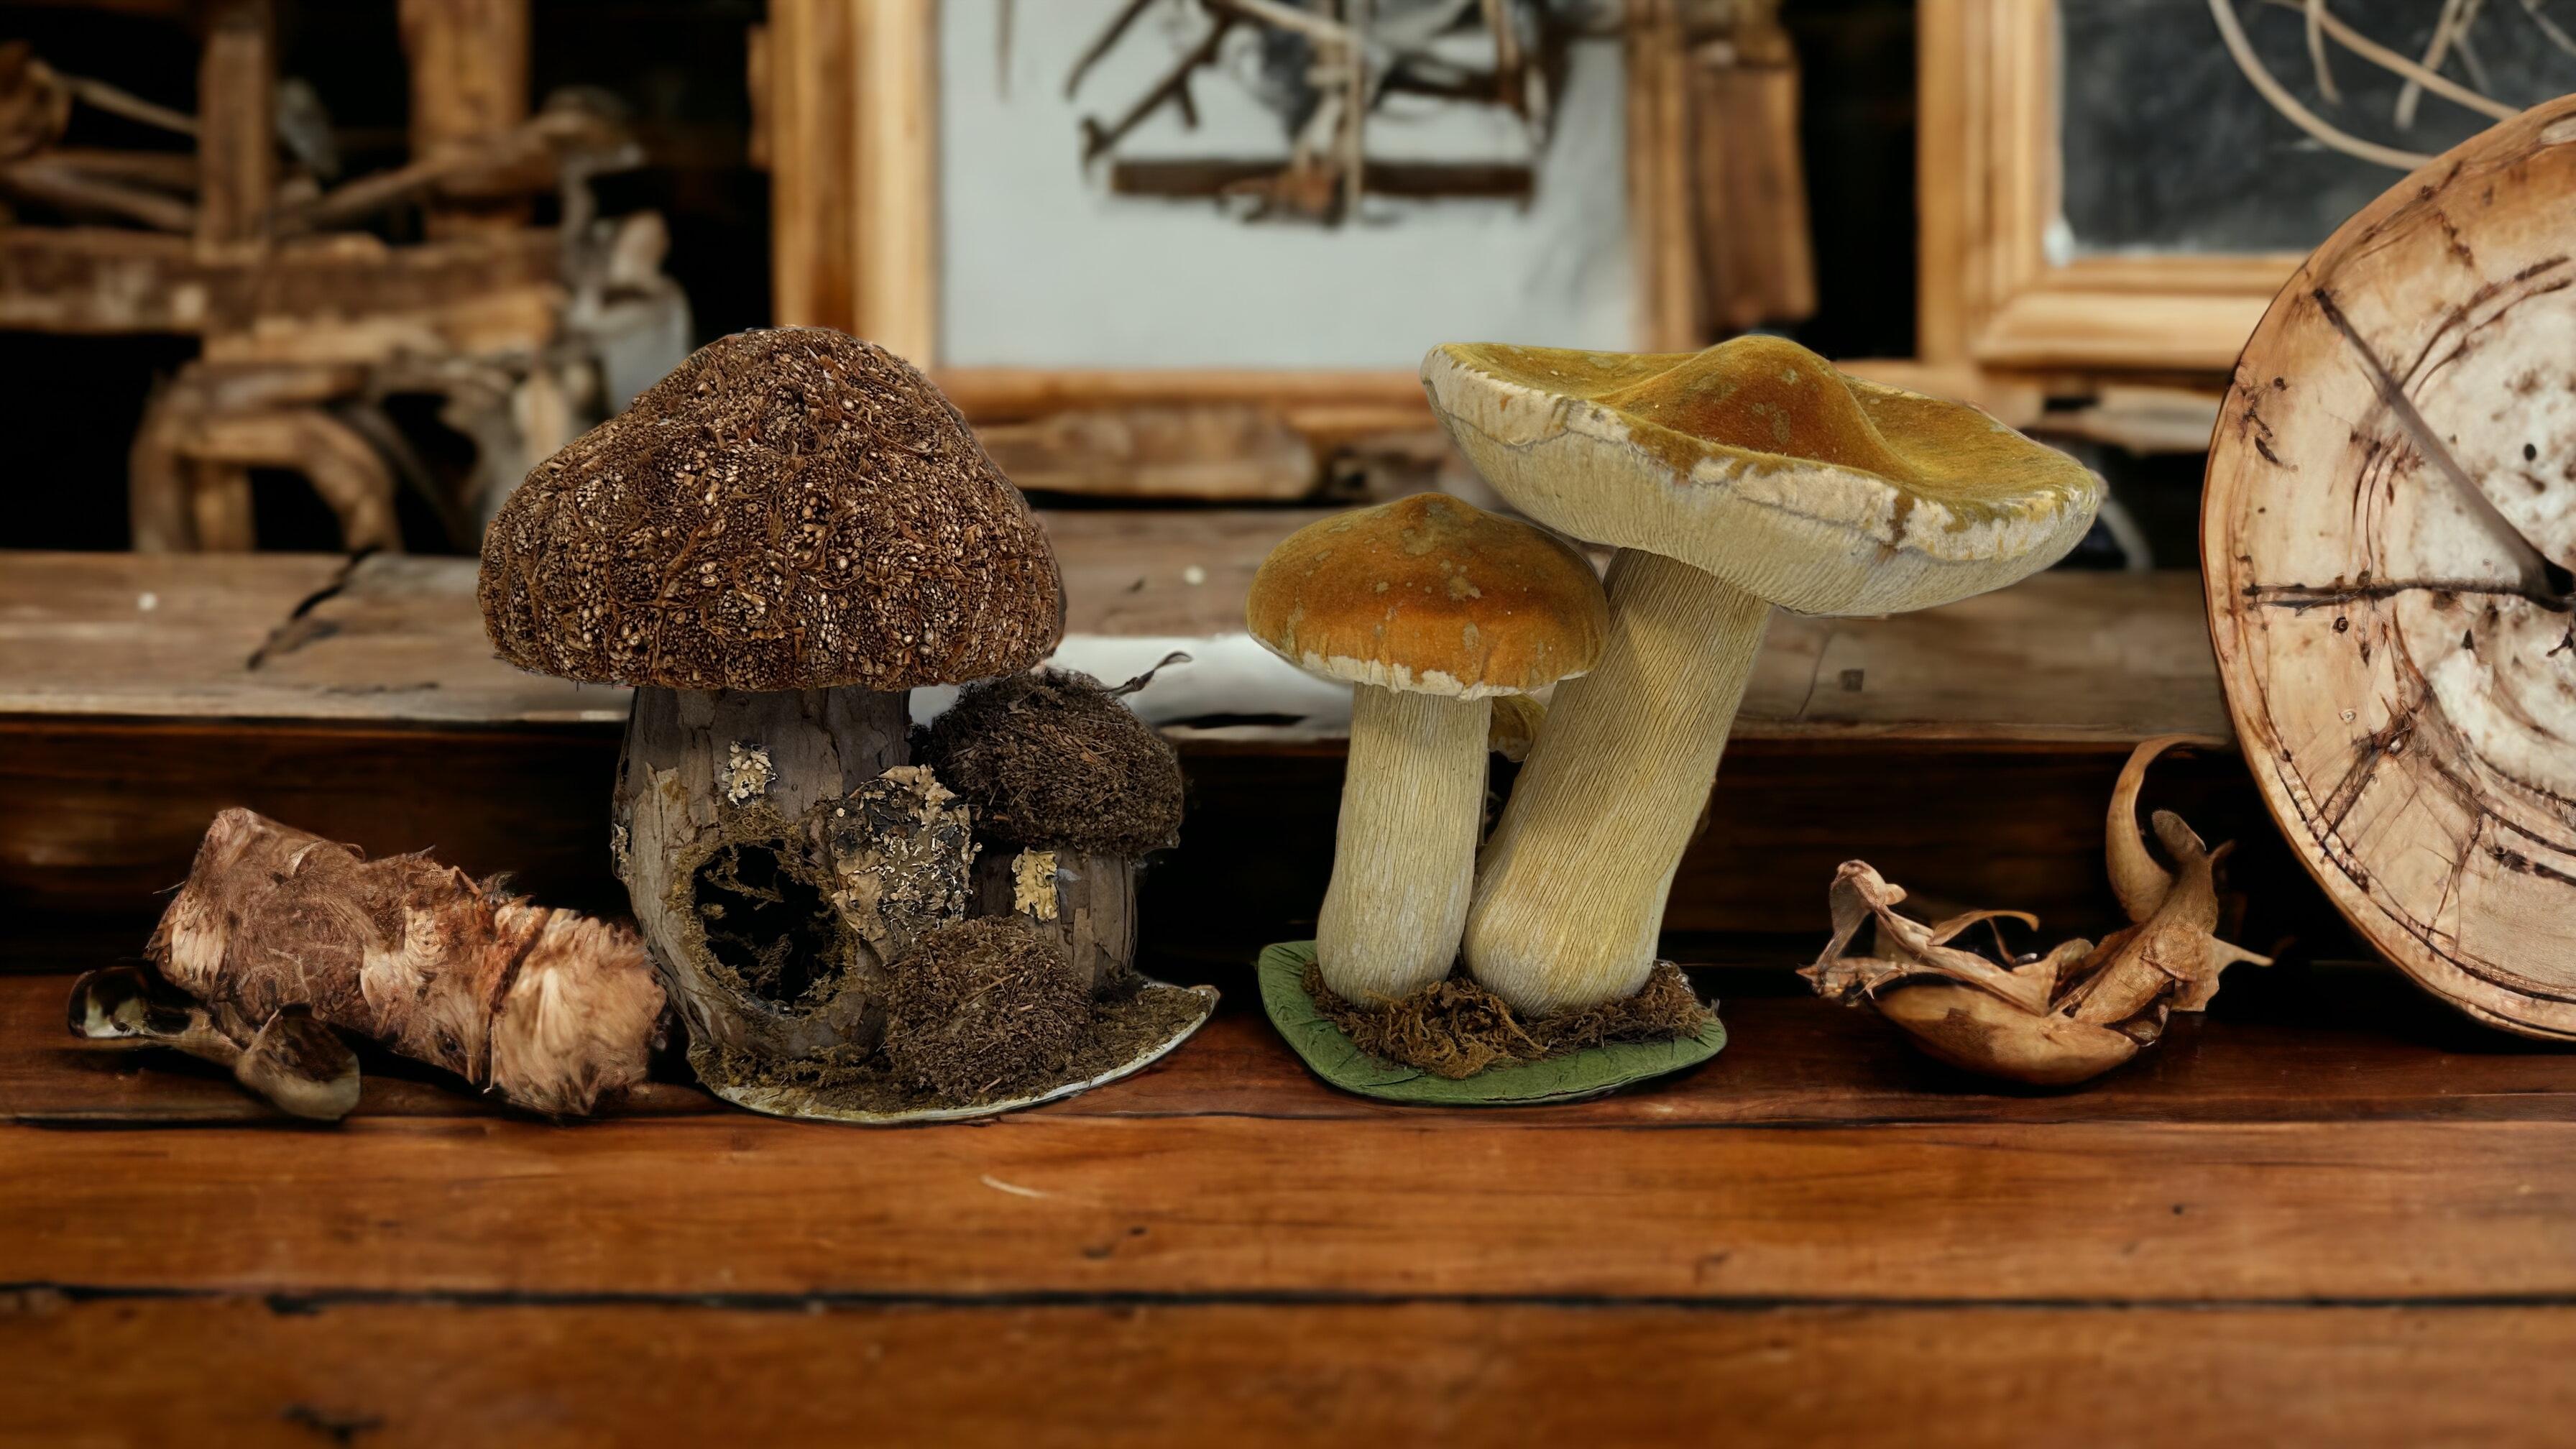 This rare vintage set of two different types of mushrooms, show Models which are native to middle Europe. This kind of items are used as teaching material in German schools. Colorful in natural design they show the children how mushrooms look